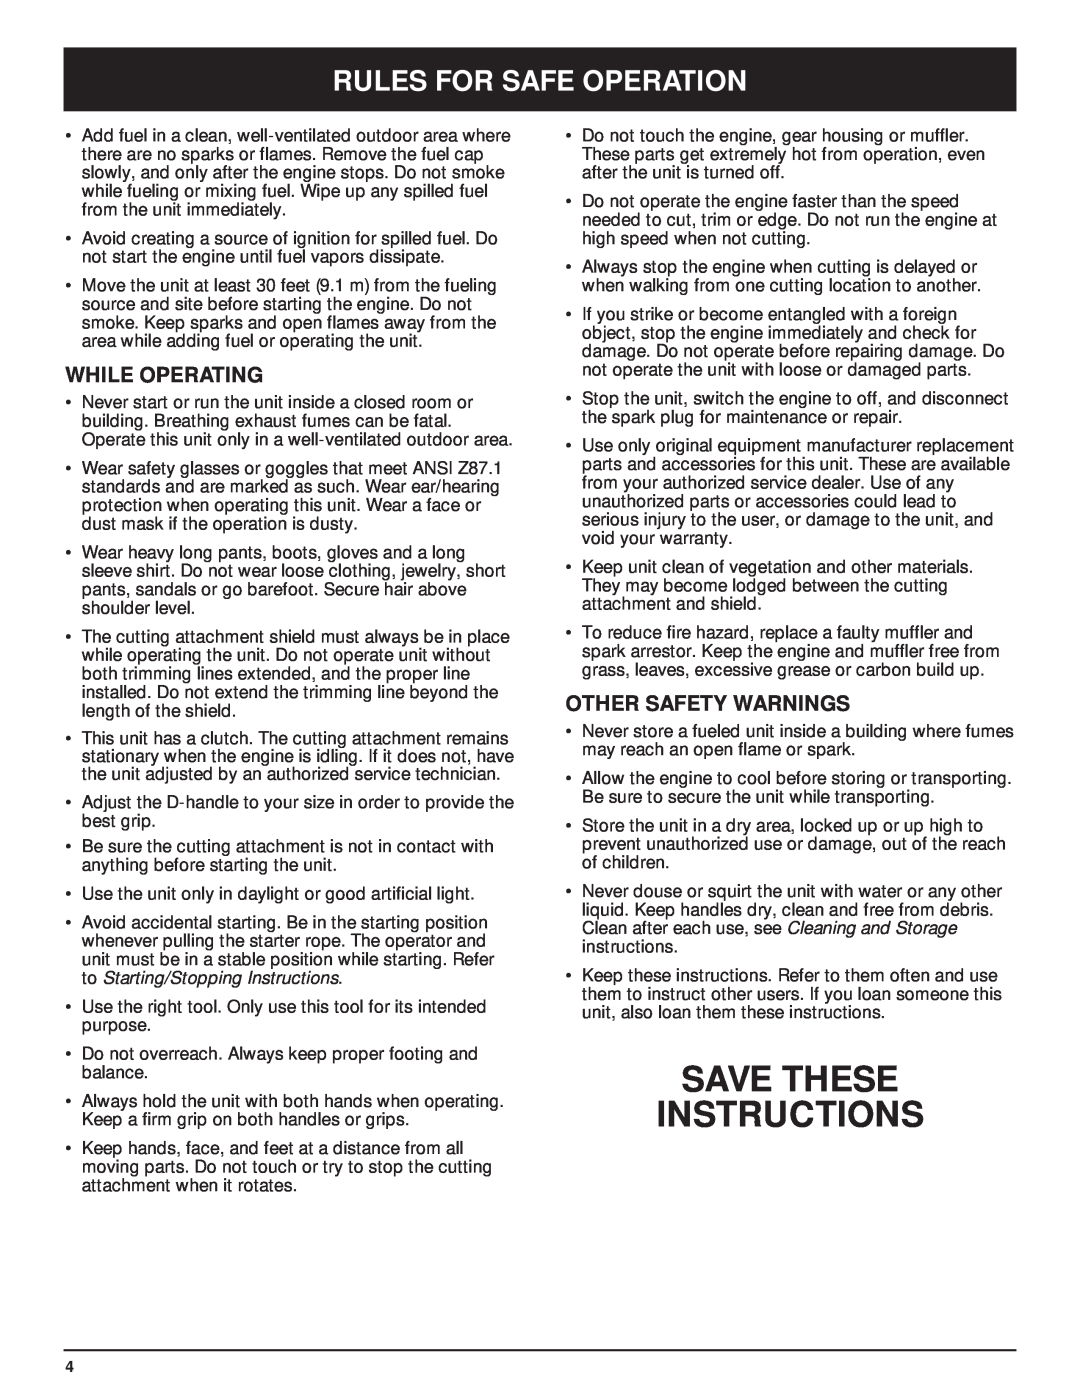 McCulloch MT705 manual Save These Instructions, While Operating, Other Safety Warnings, Rules For Safe Operation 